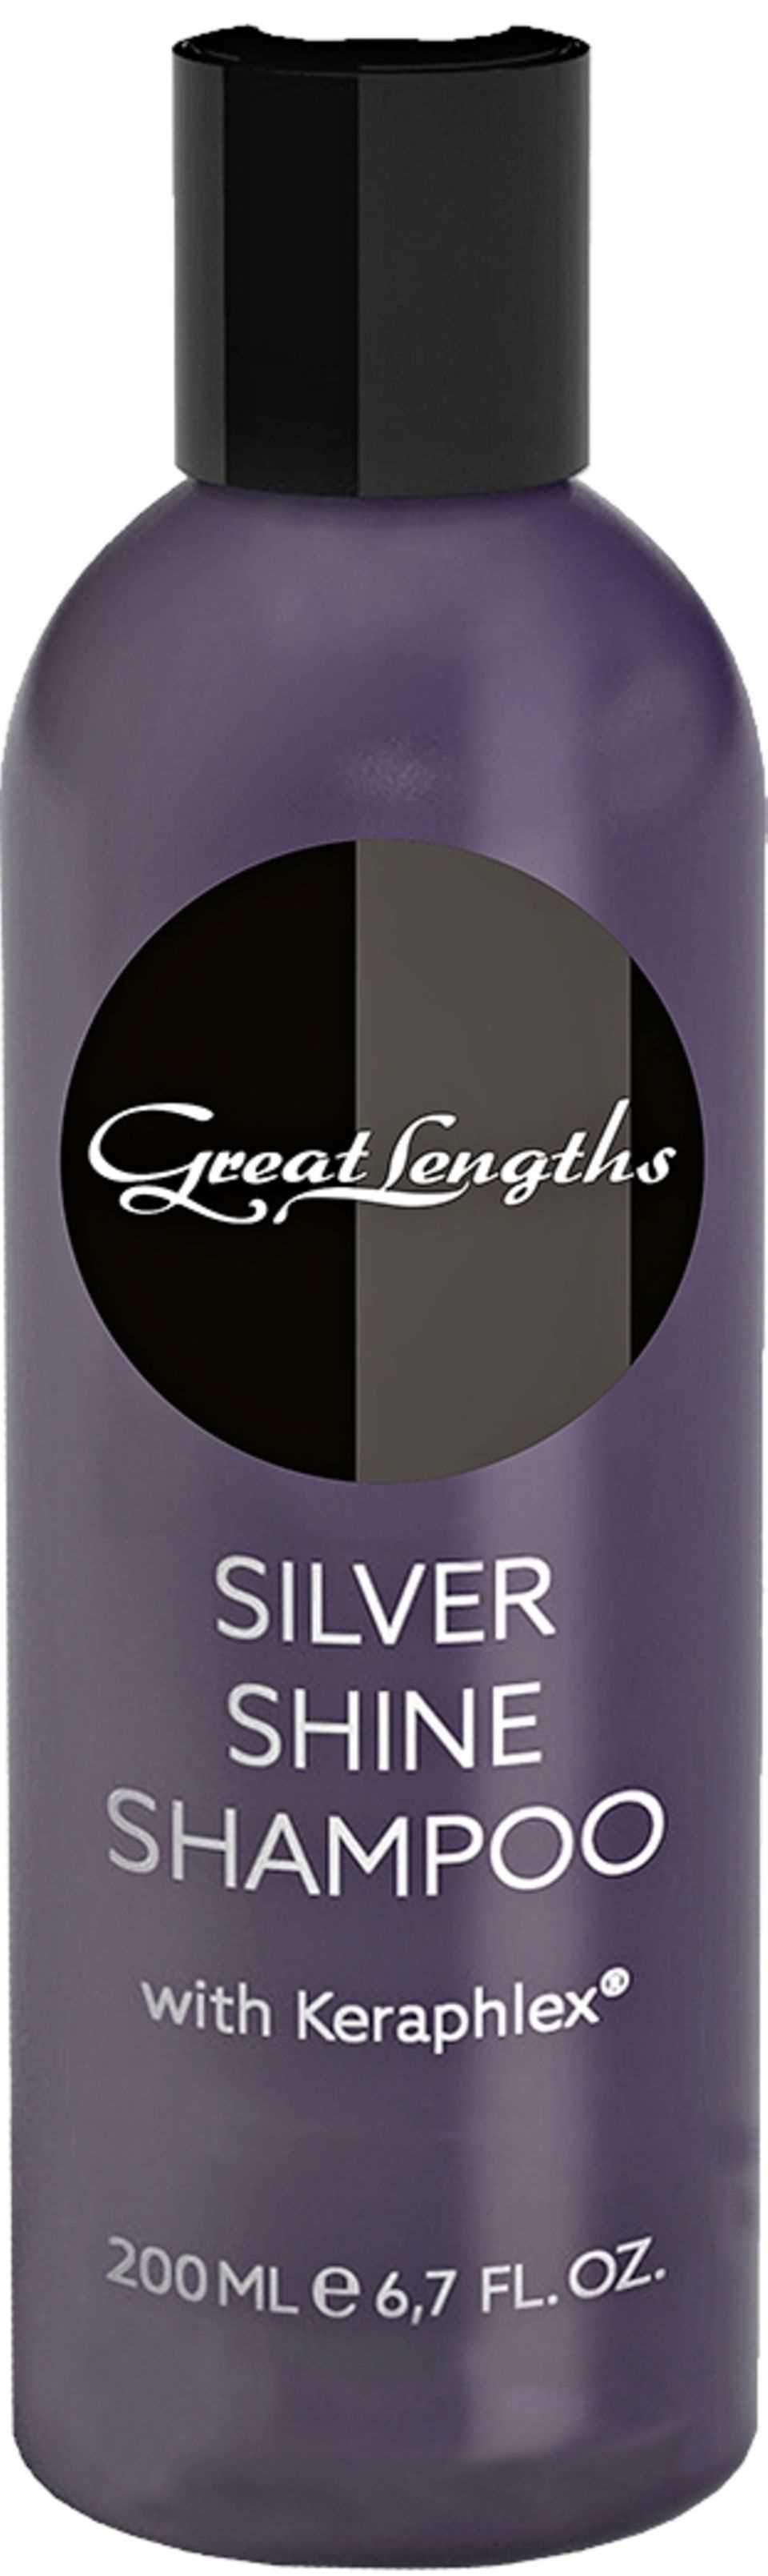 "Silver Shine Shampoo" by Great Lengths neutralized with Kera-Protect complex.  200 ml, approx. 19 euros.